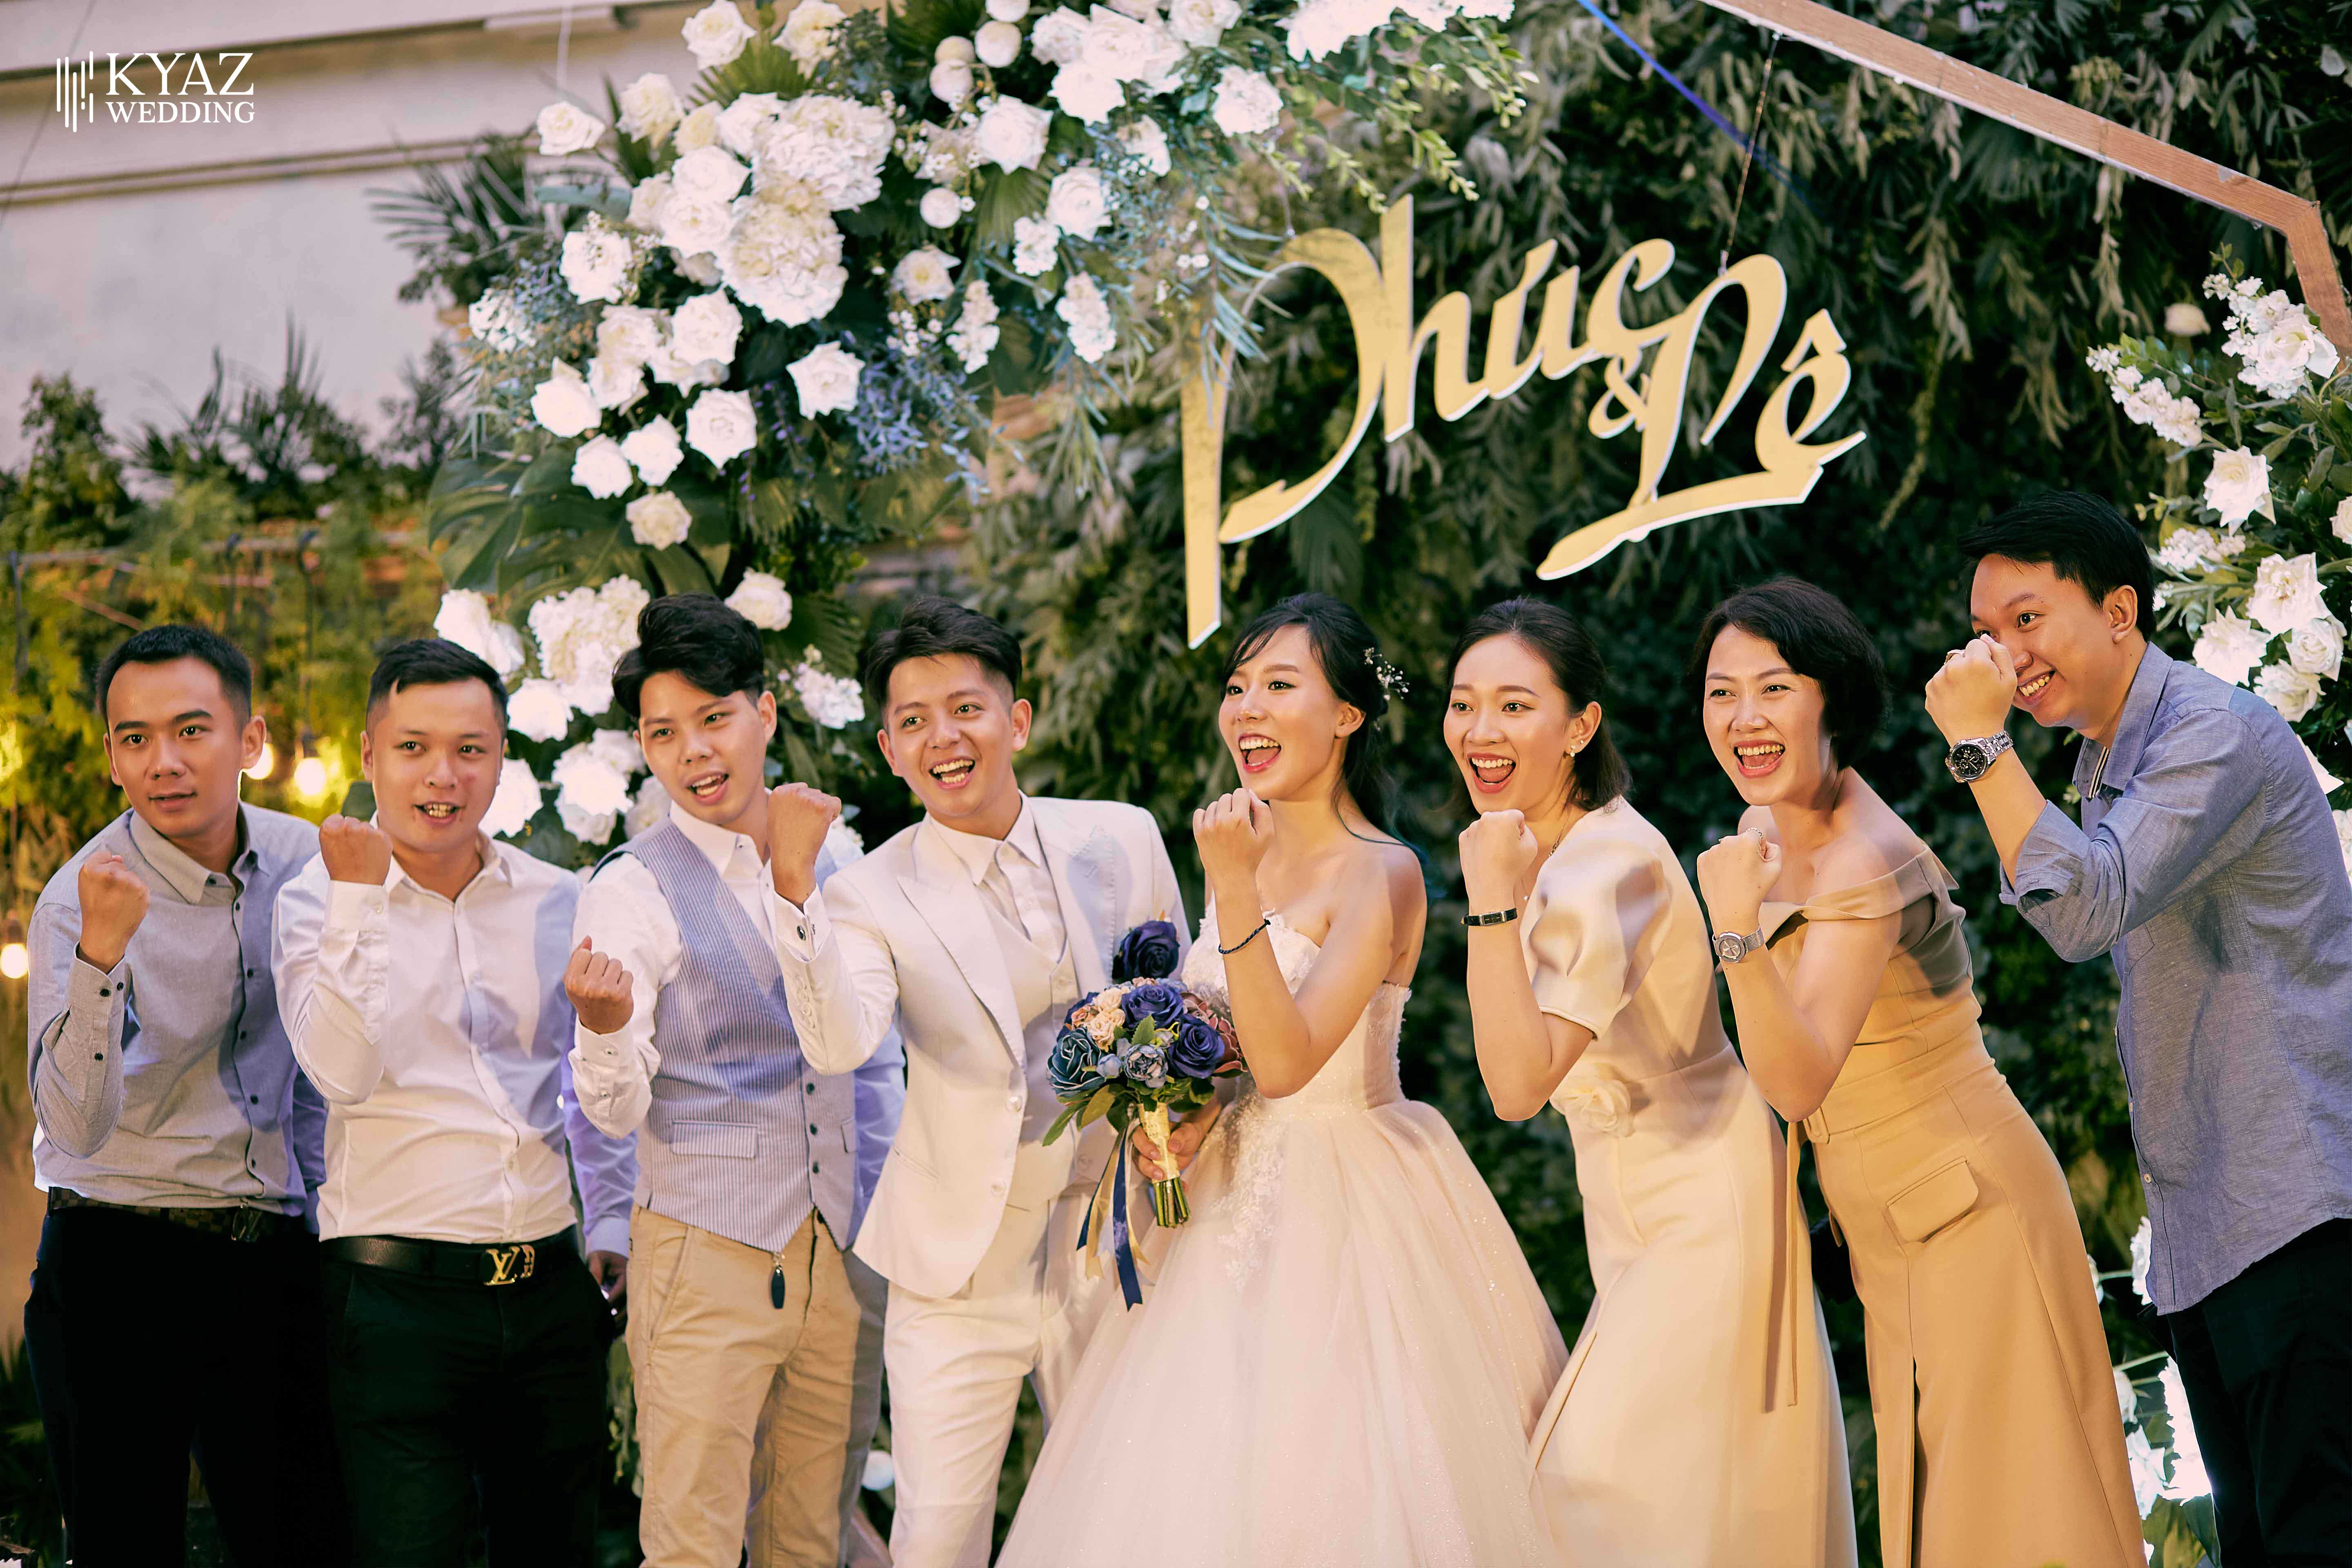 [ CEREMONY PREVIEW ] Hong Phuc & Ngoc Le